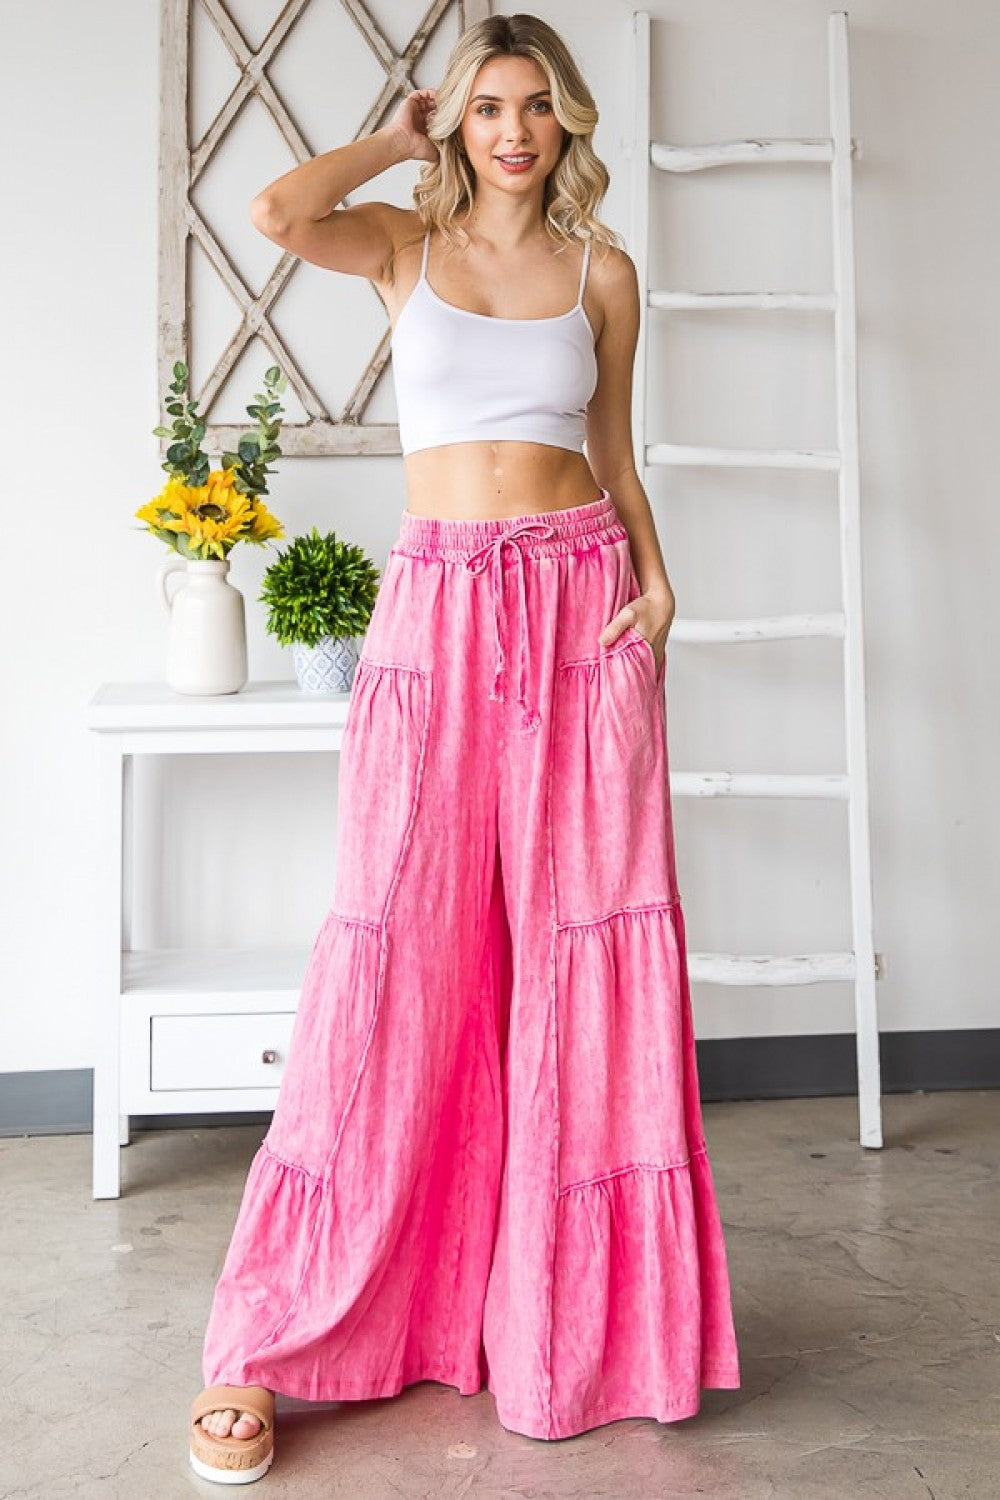 Hot Pink Mineral Washed Wide Leg Tiered Cotton Pants. They have an elastic waistband with a drawstring. There are Ruffle details on each tier. The pants are flowy, loose fitting and comfortable